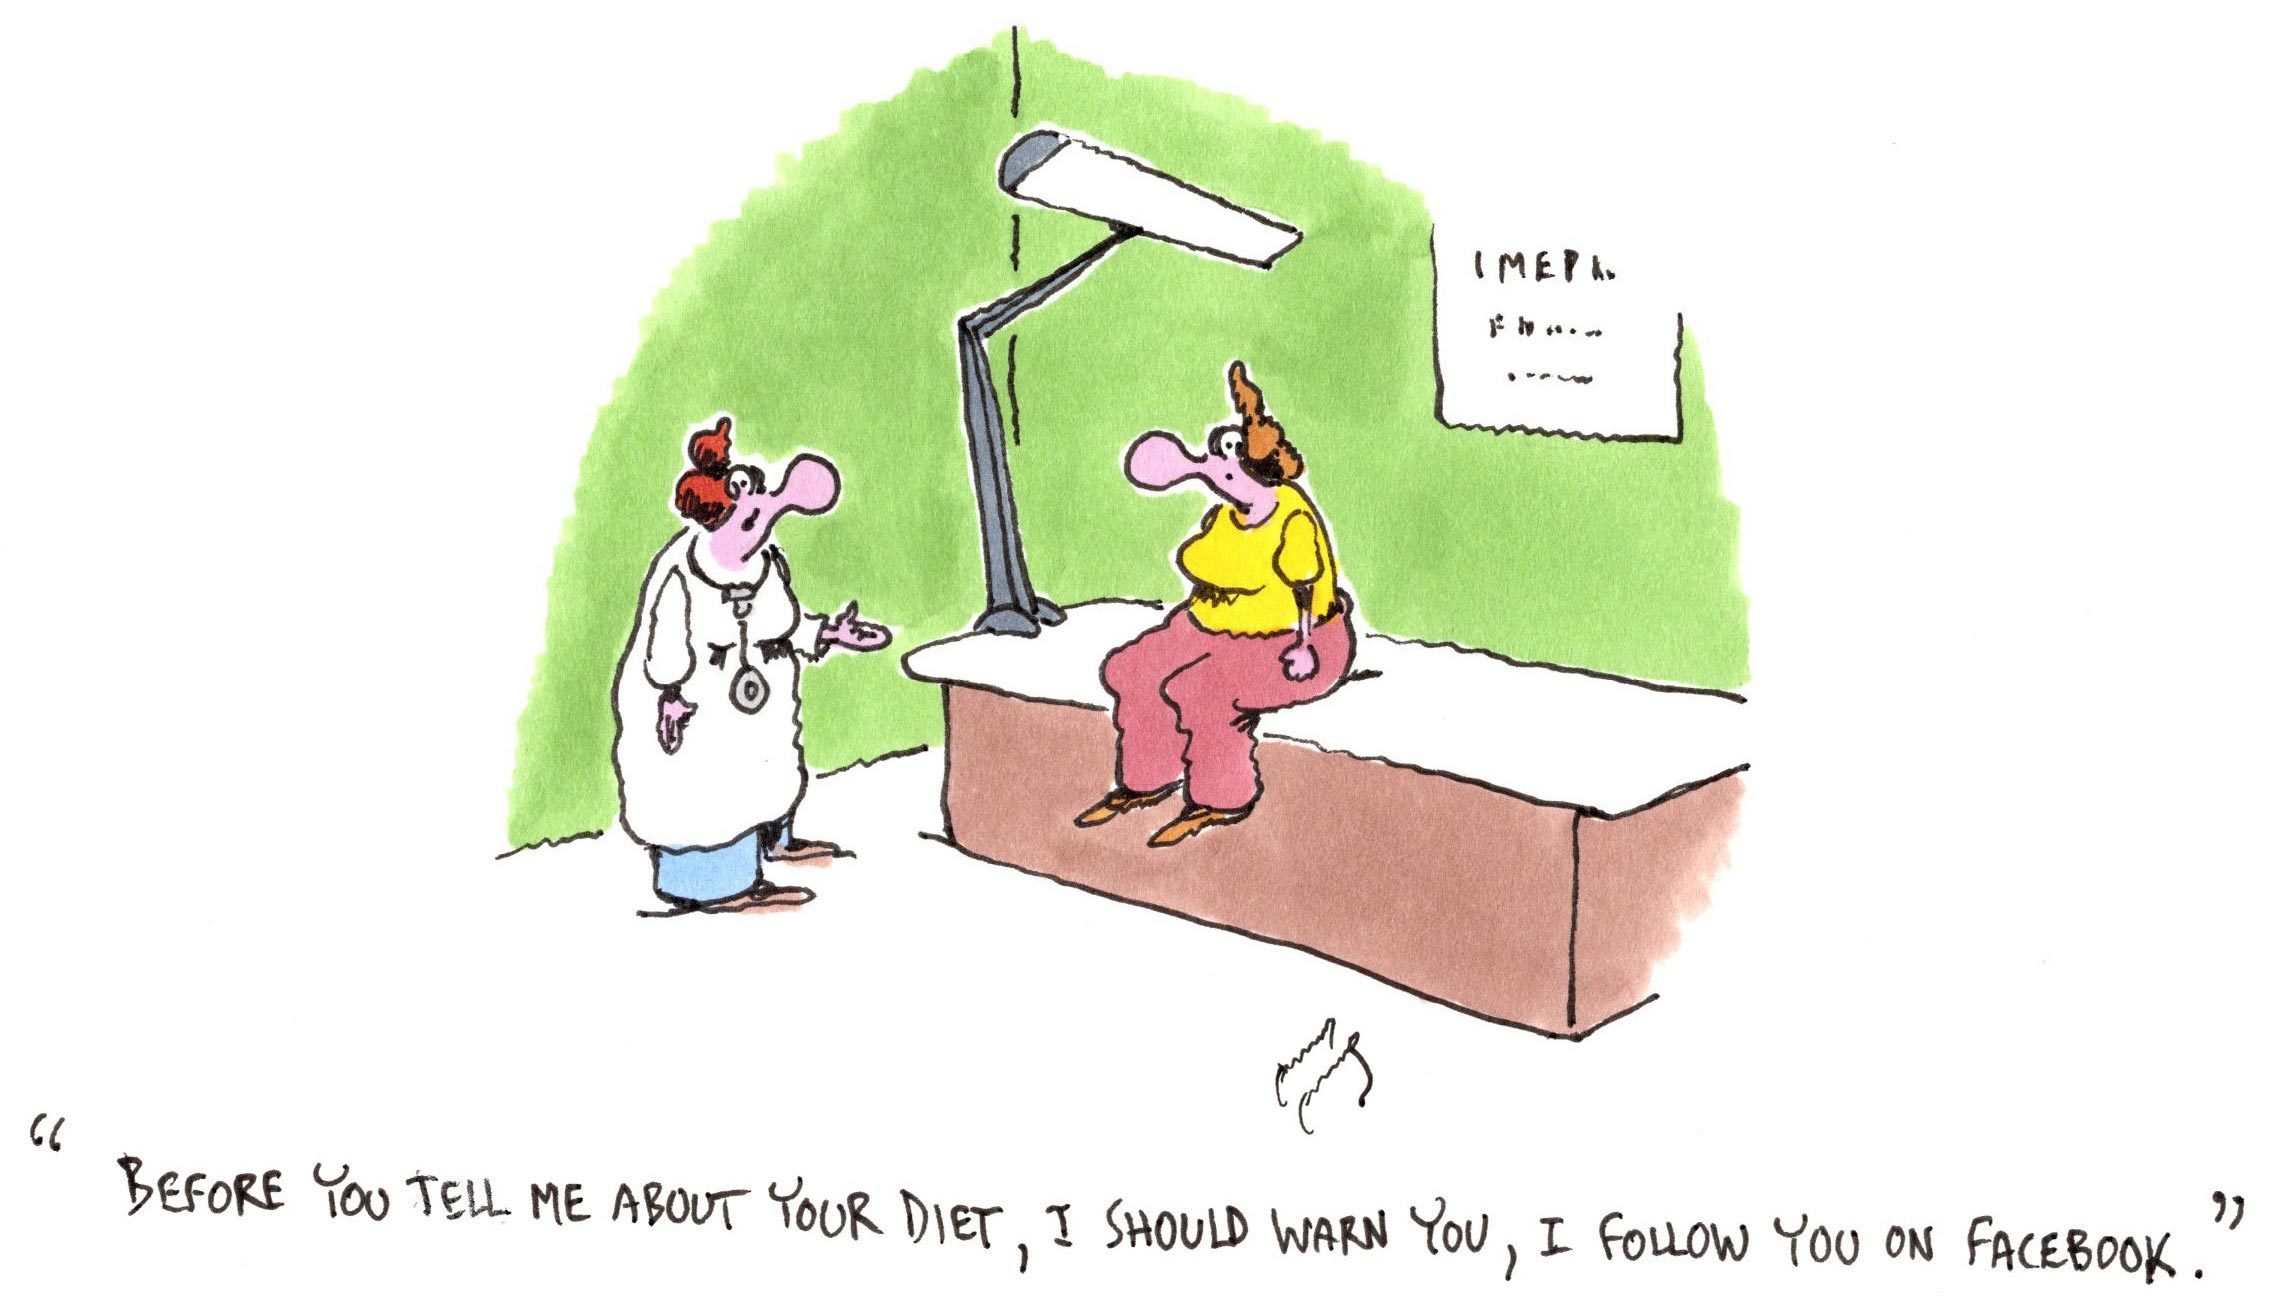 a doctor says to the patient, "before you tell me about your diet, i should warn you, i follow you on facebook"